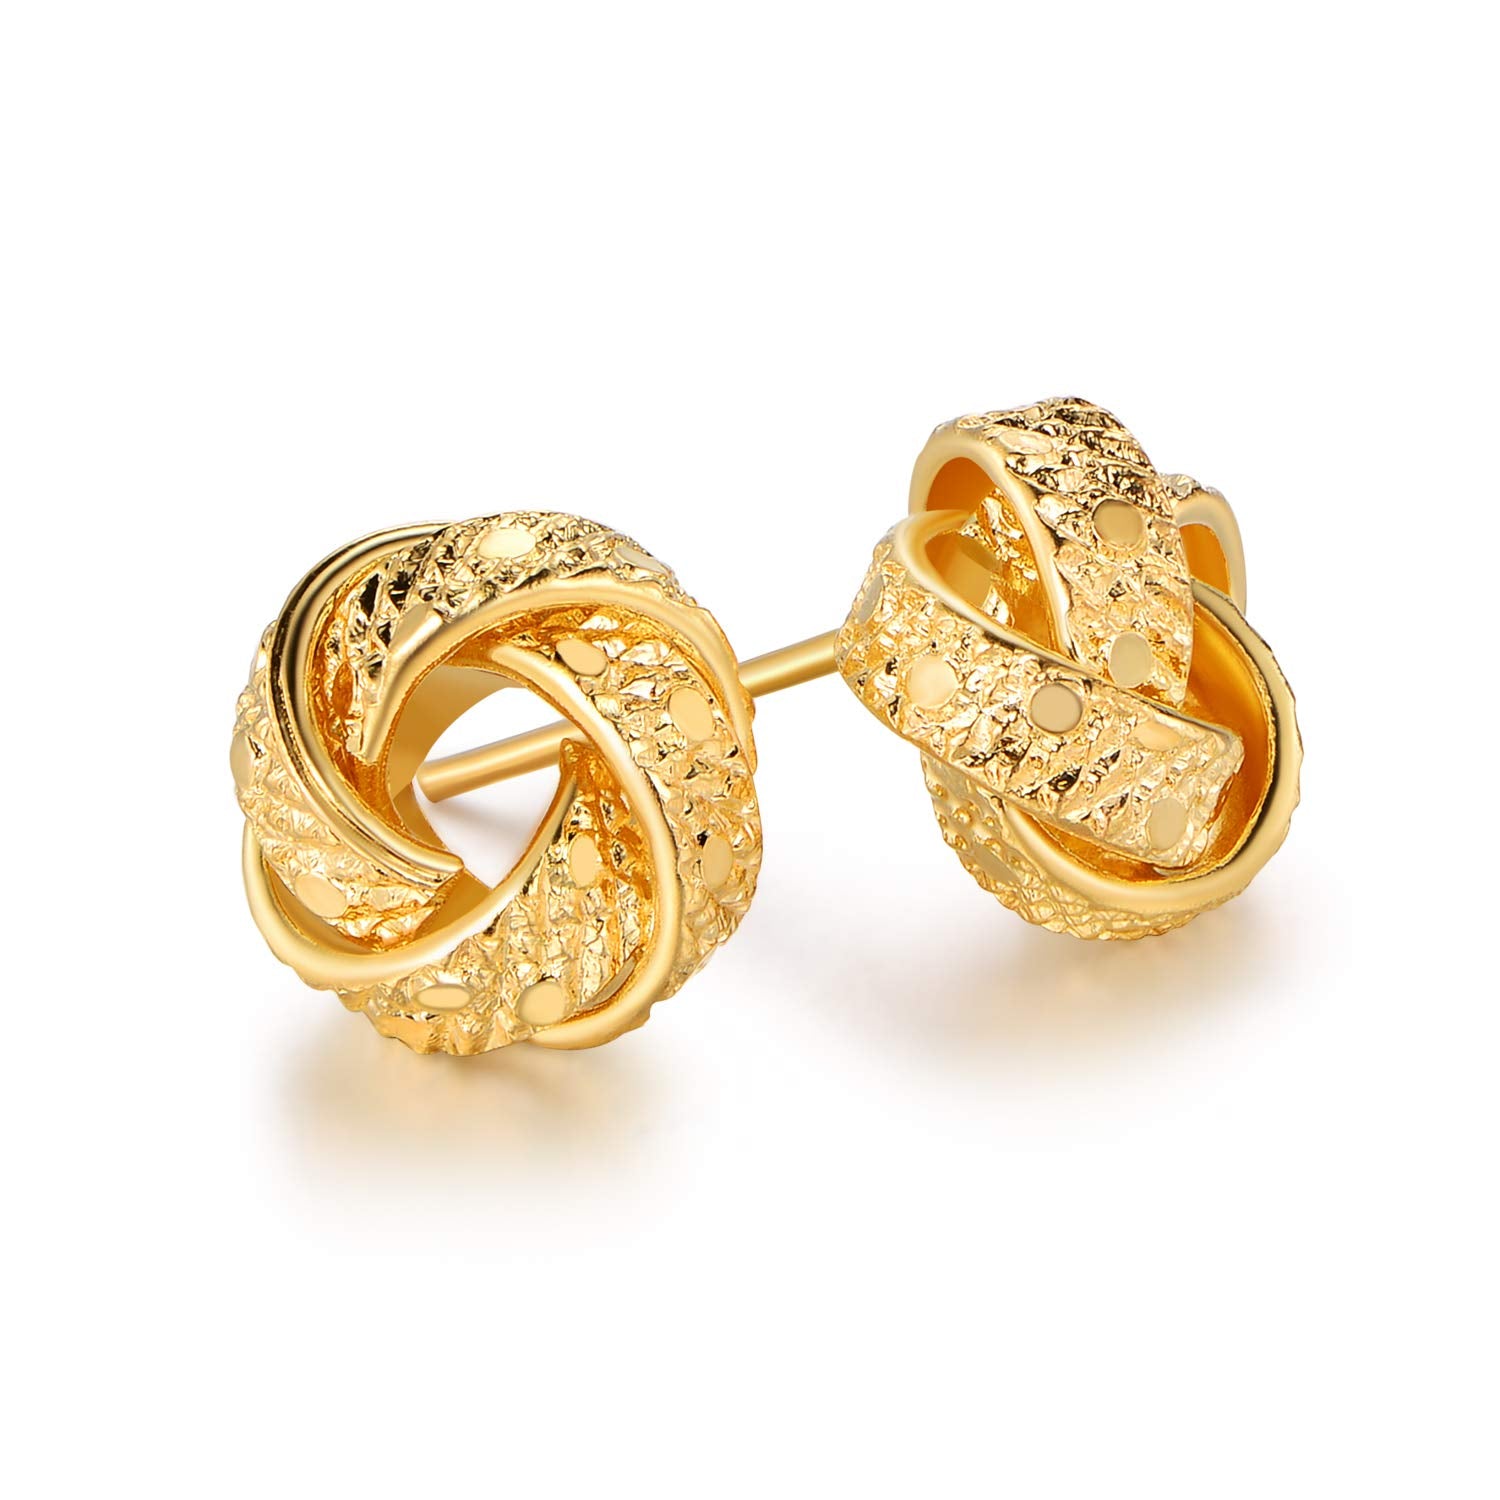 18K Gold Plated Textured Love Knot Earrings